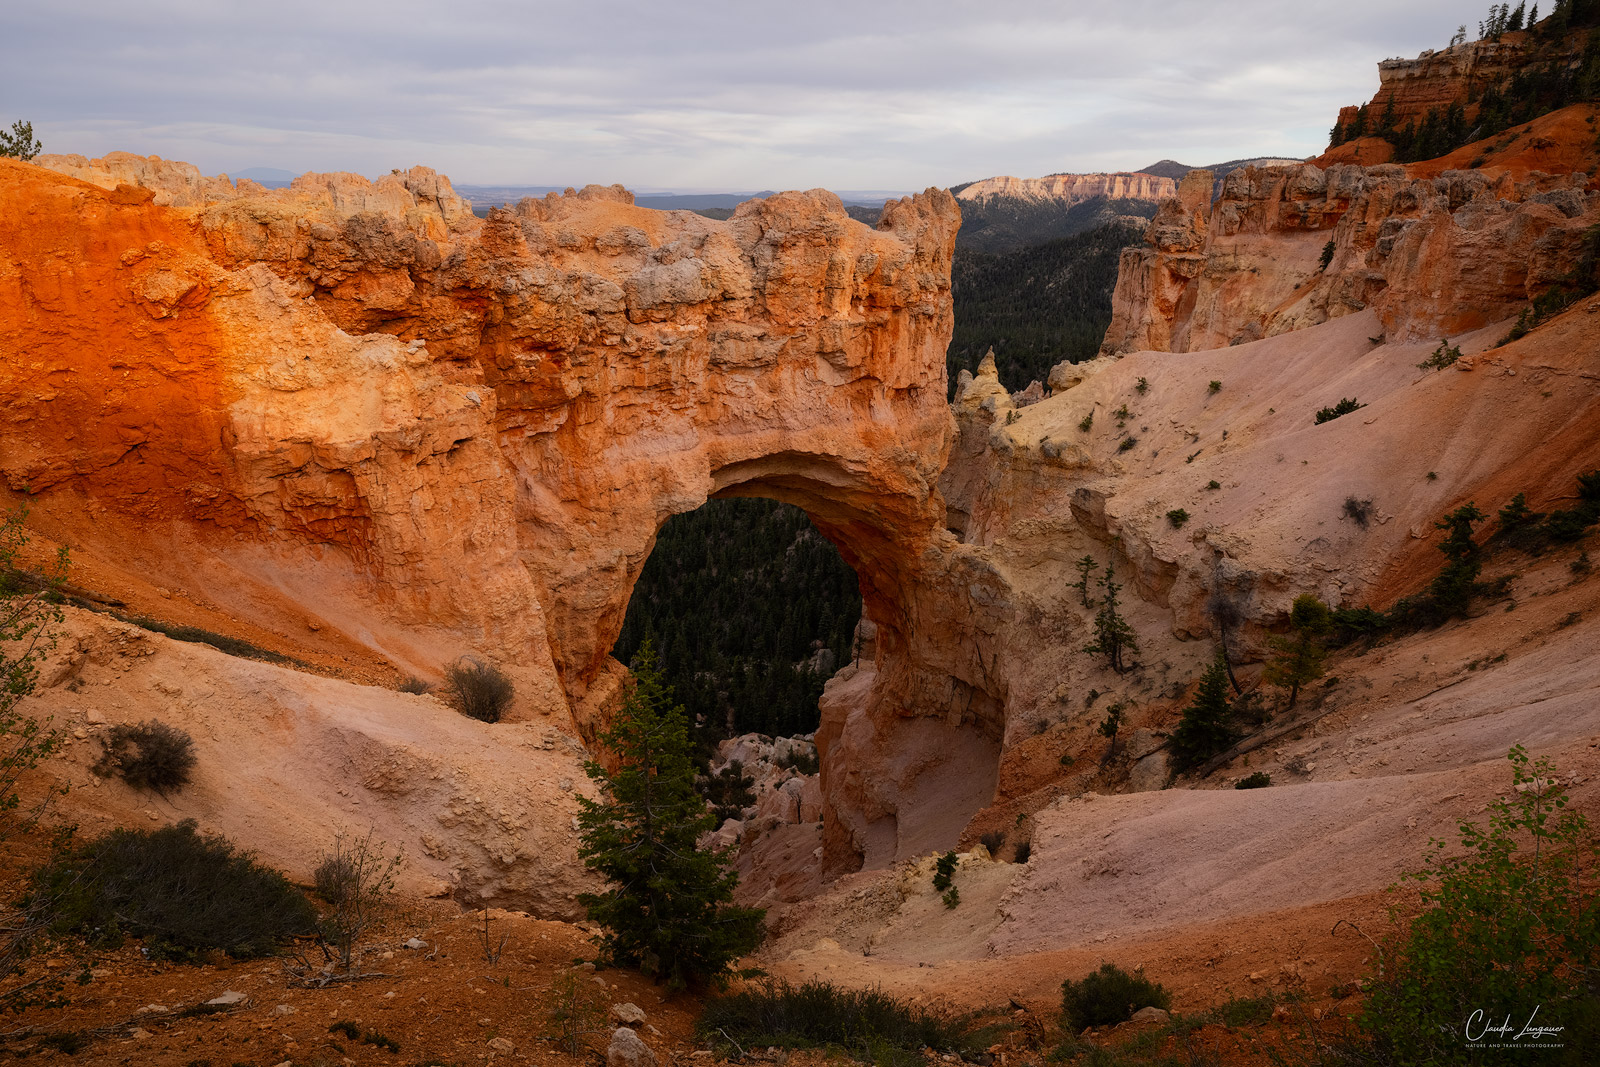 View of arch at Bryce Canyon National Park in Utah.